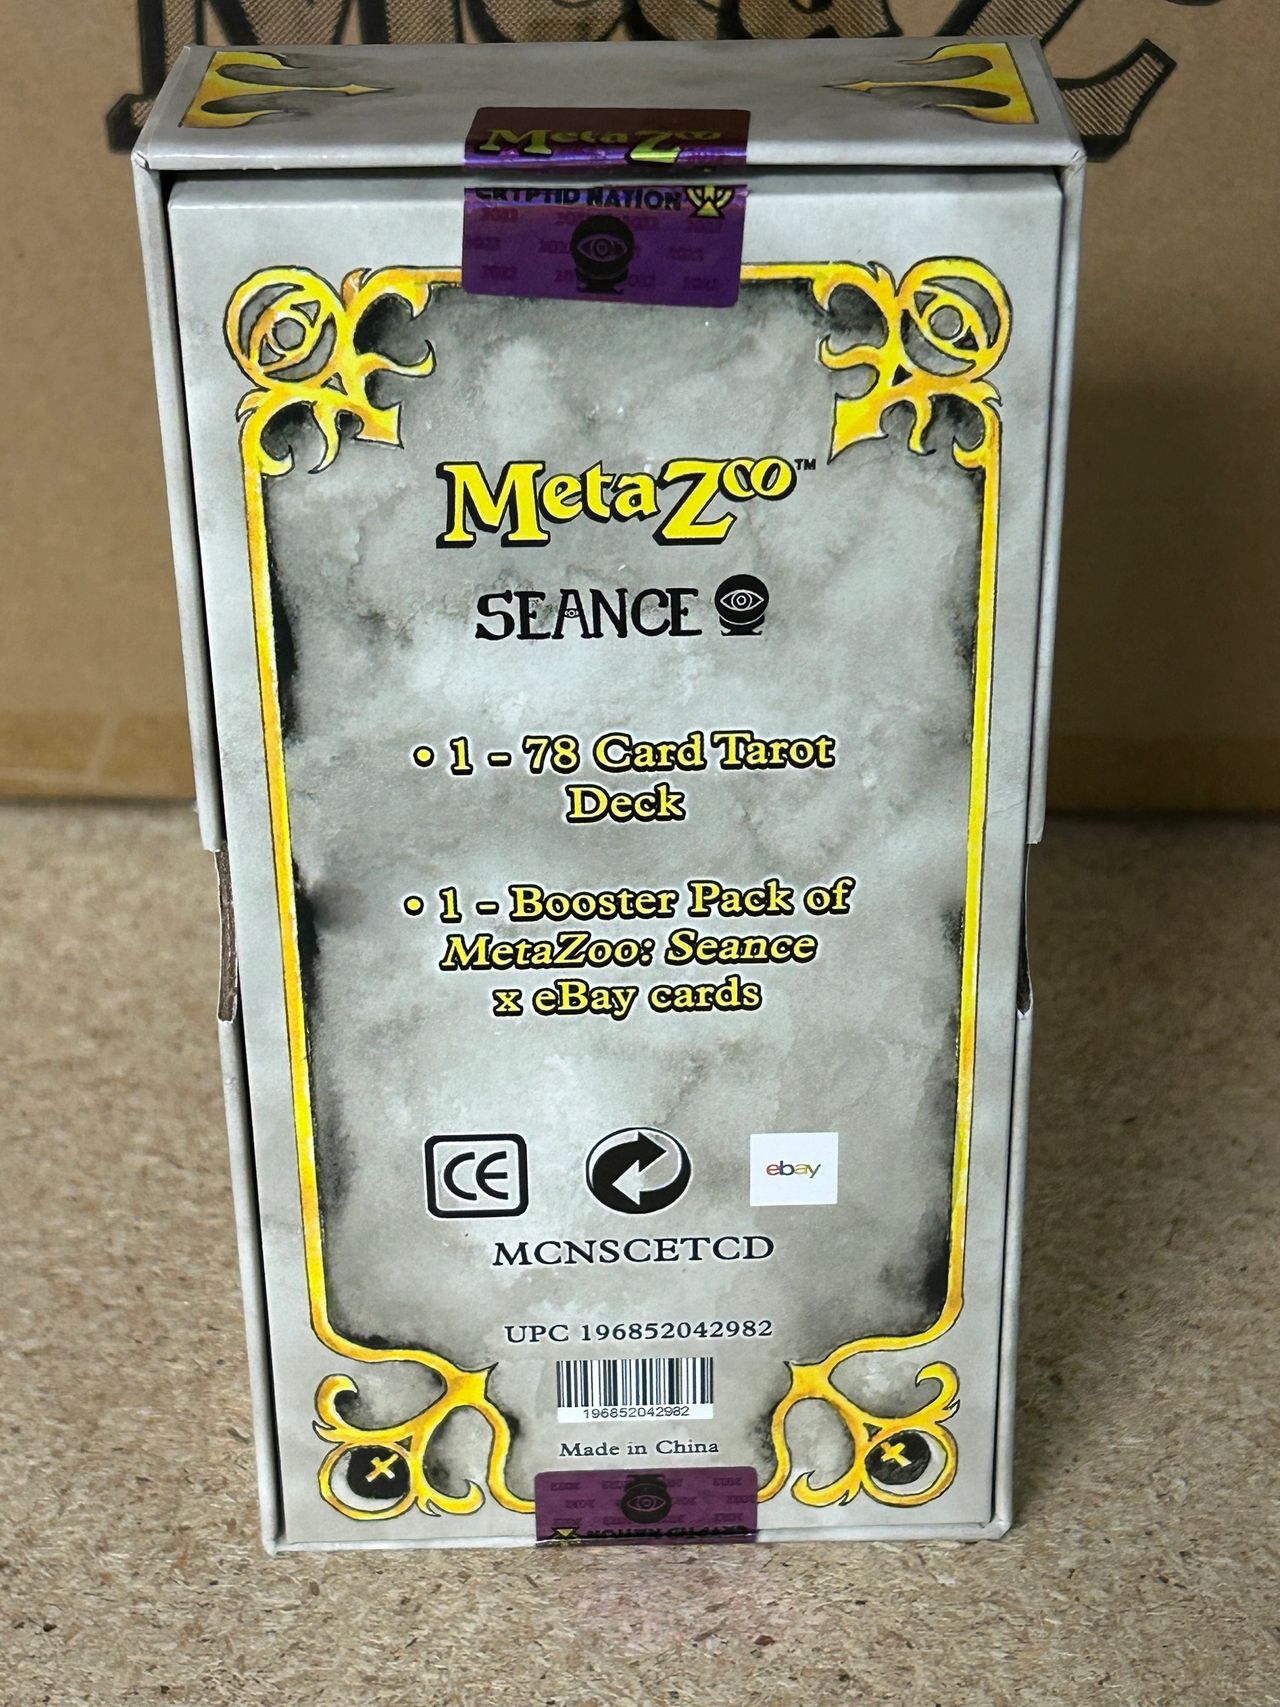 Set Collectors Guide To MetaZoo Seance Tarot Cards